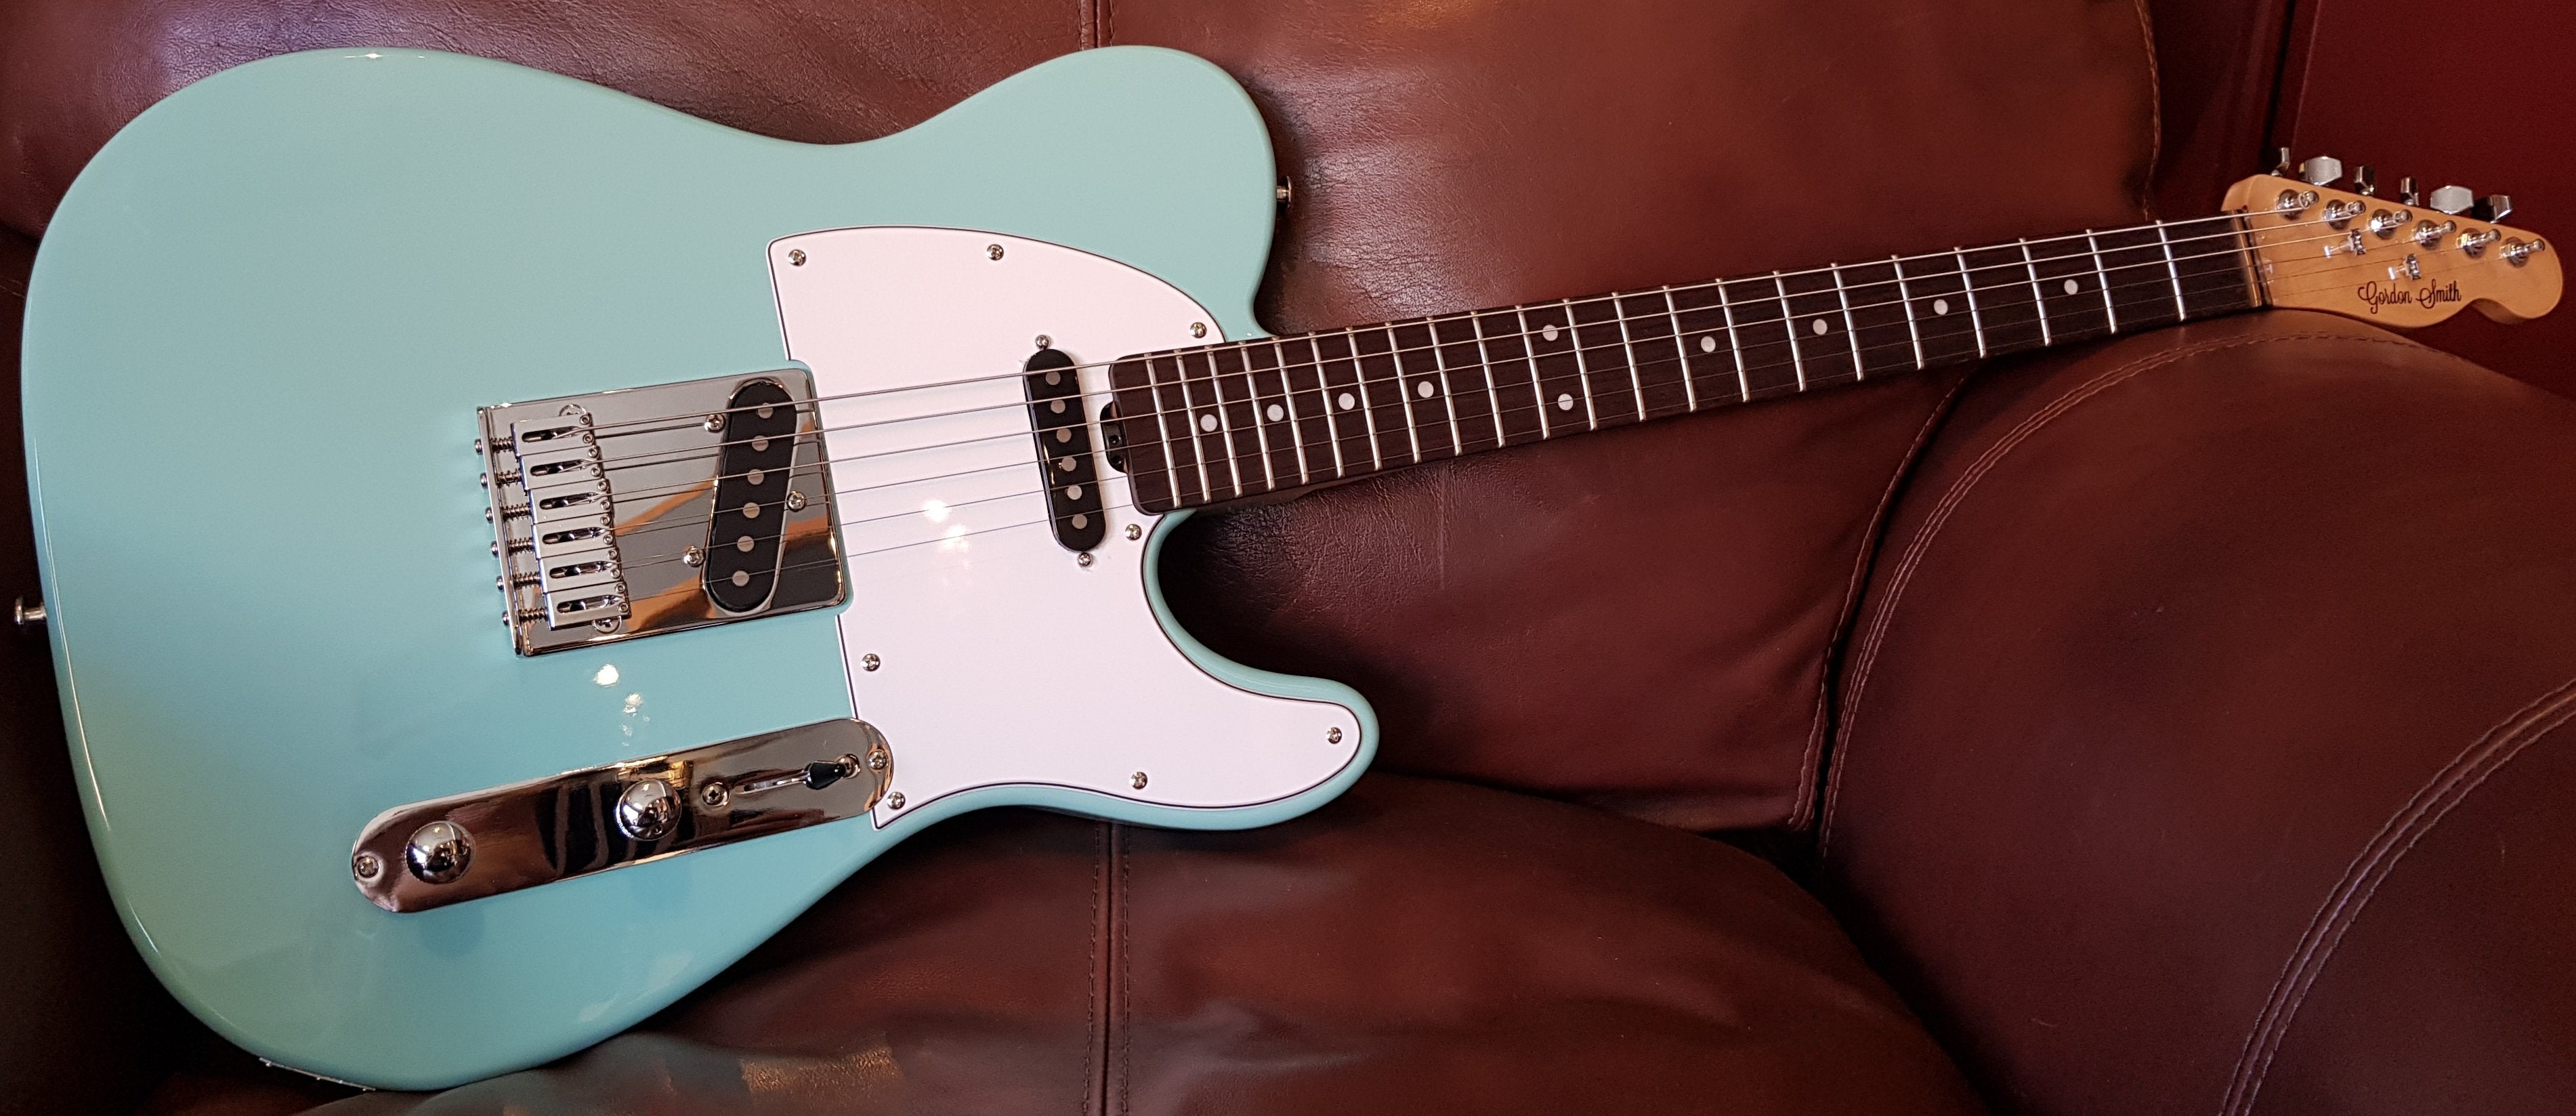 Gordon Smith Classic T Sea Foam Green & Rosewood Neck SN: 19318, Electric Guitar for sale at Richards Guitars.